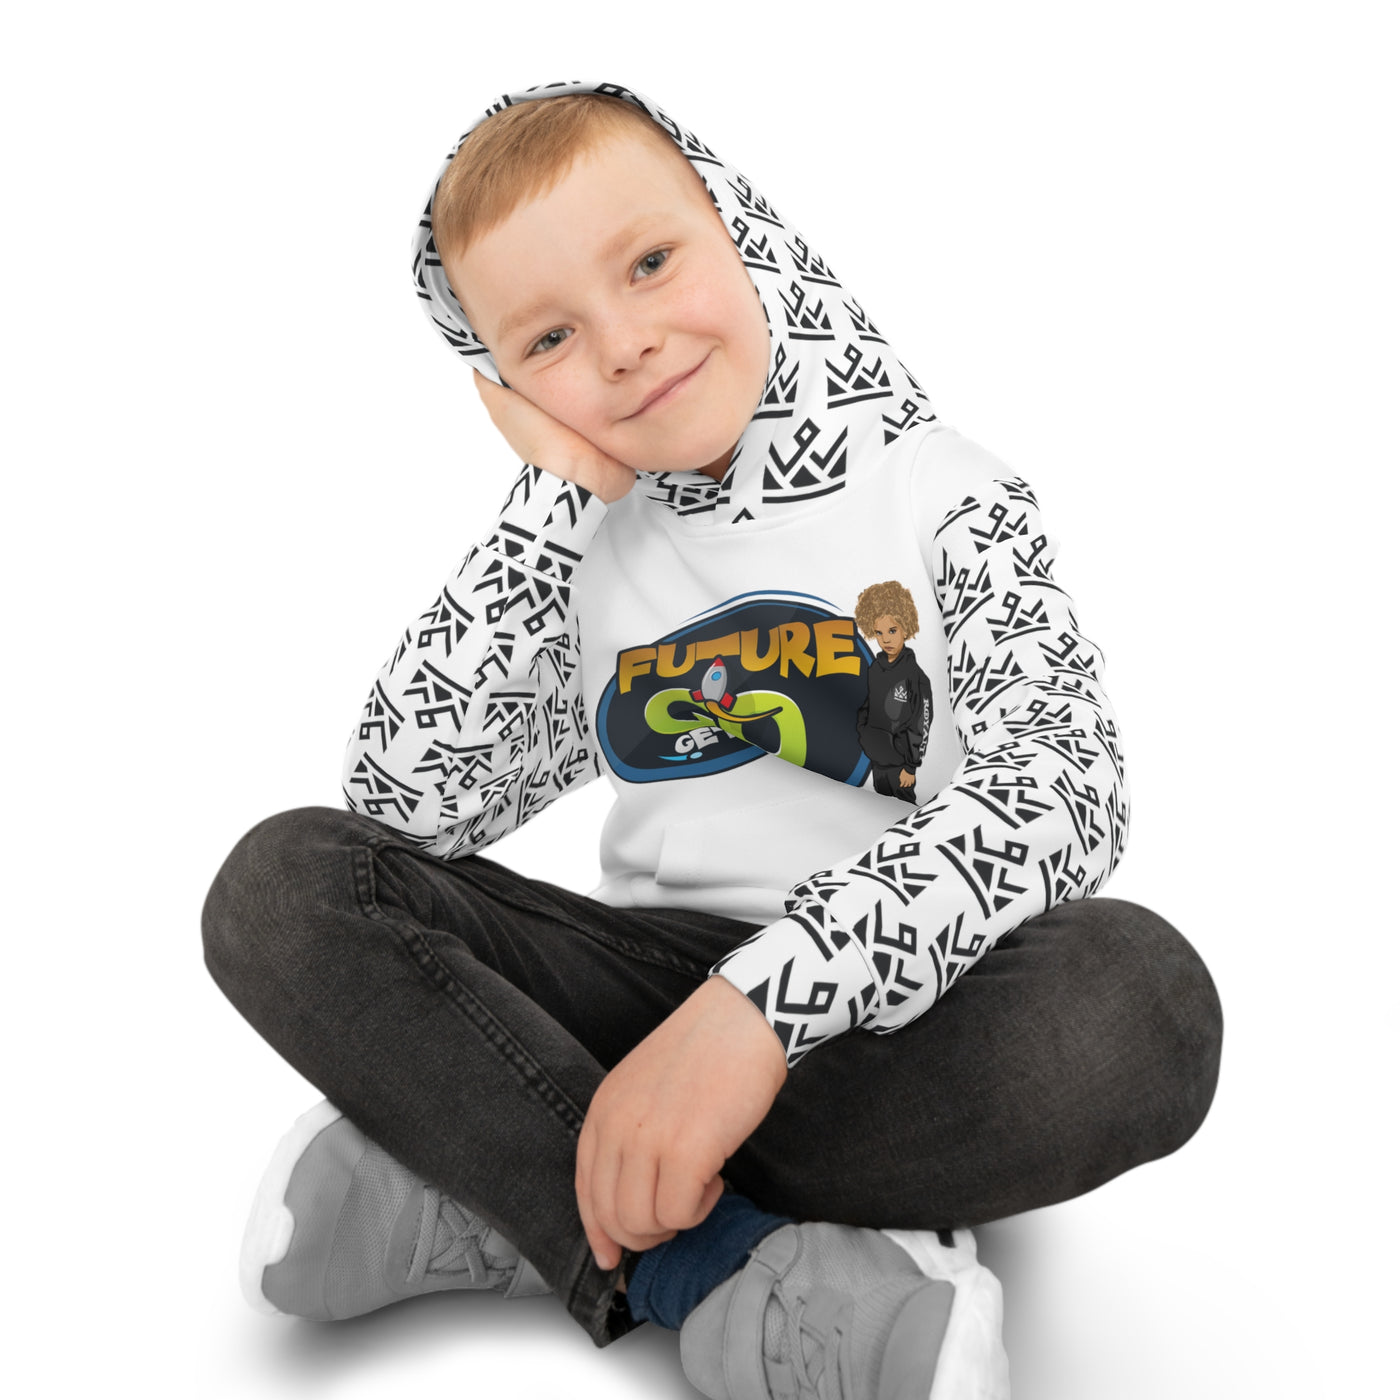 Future Go Getter  Kids Hoodie (White)  Sublimation